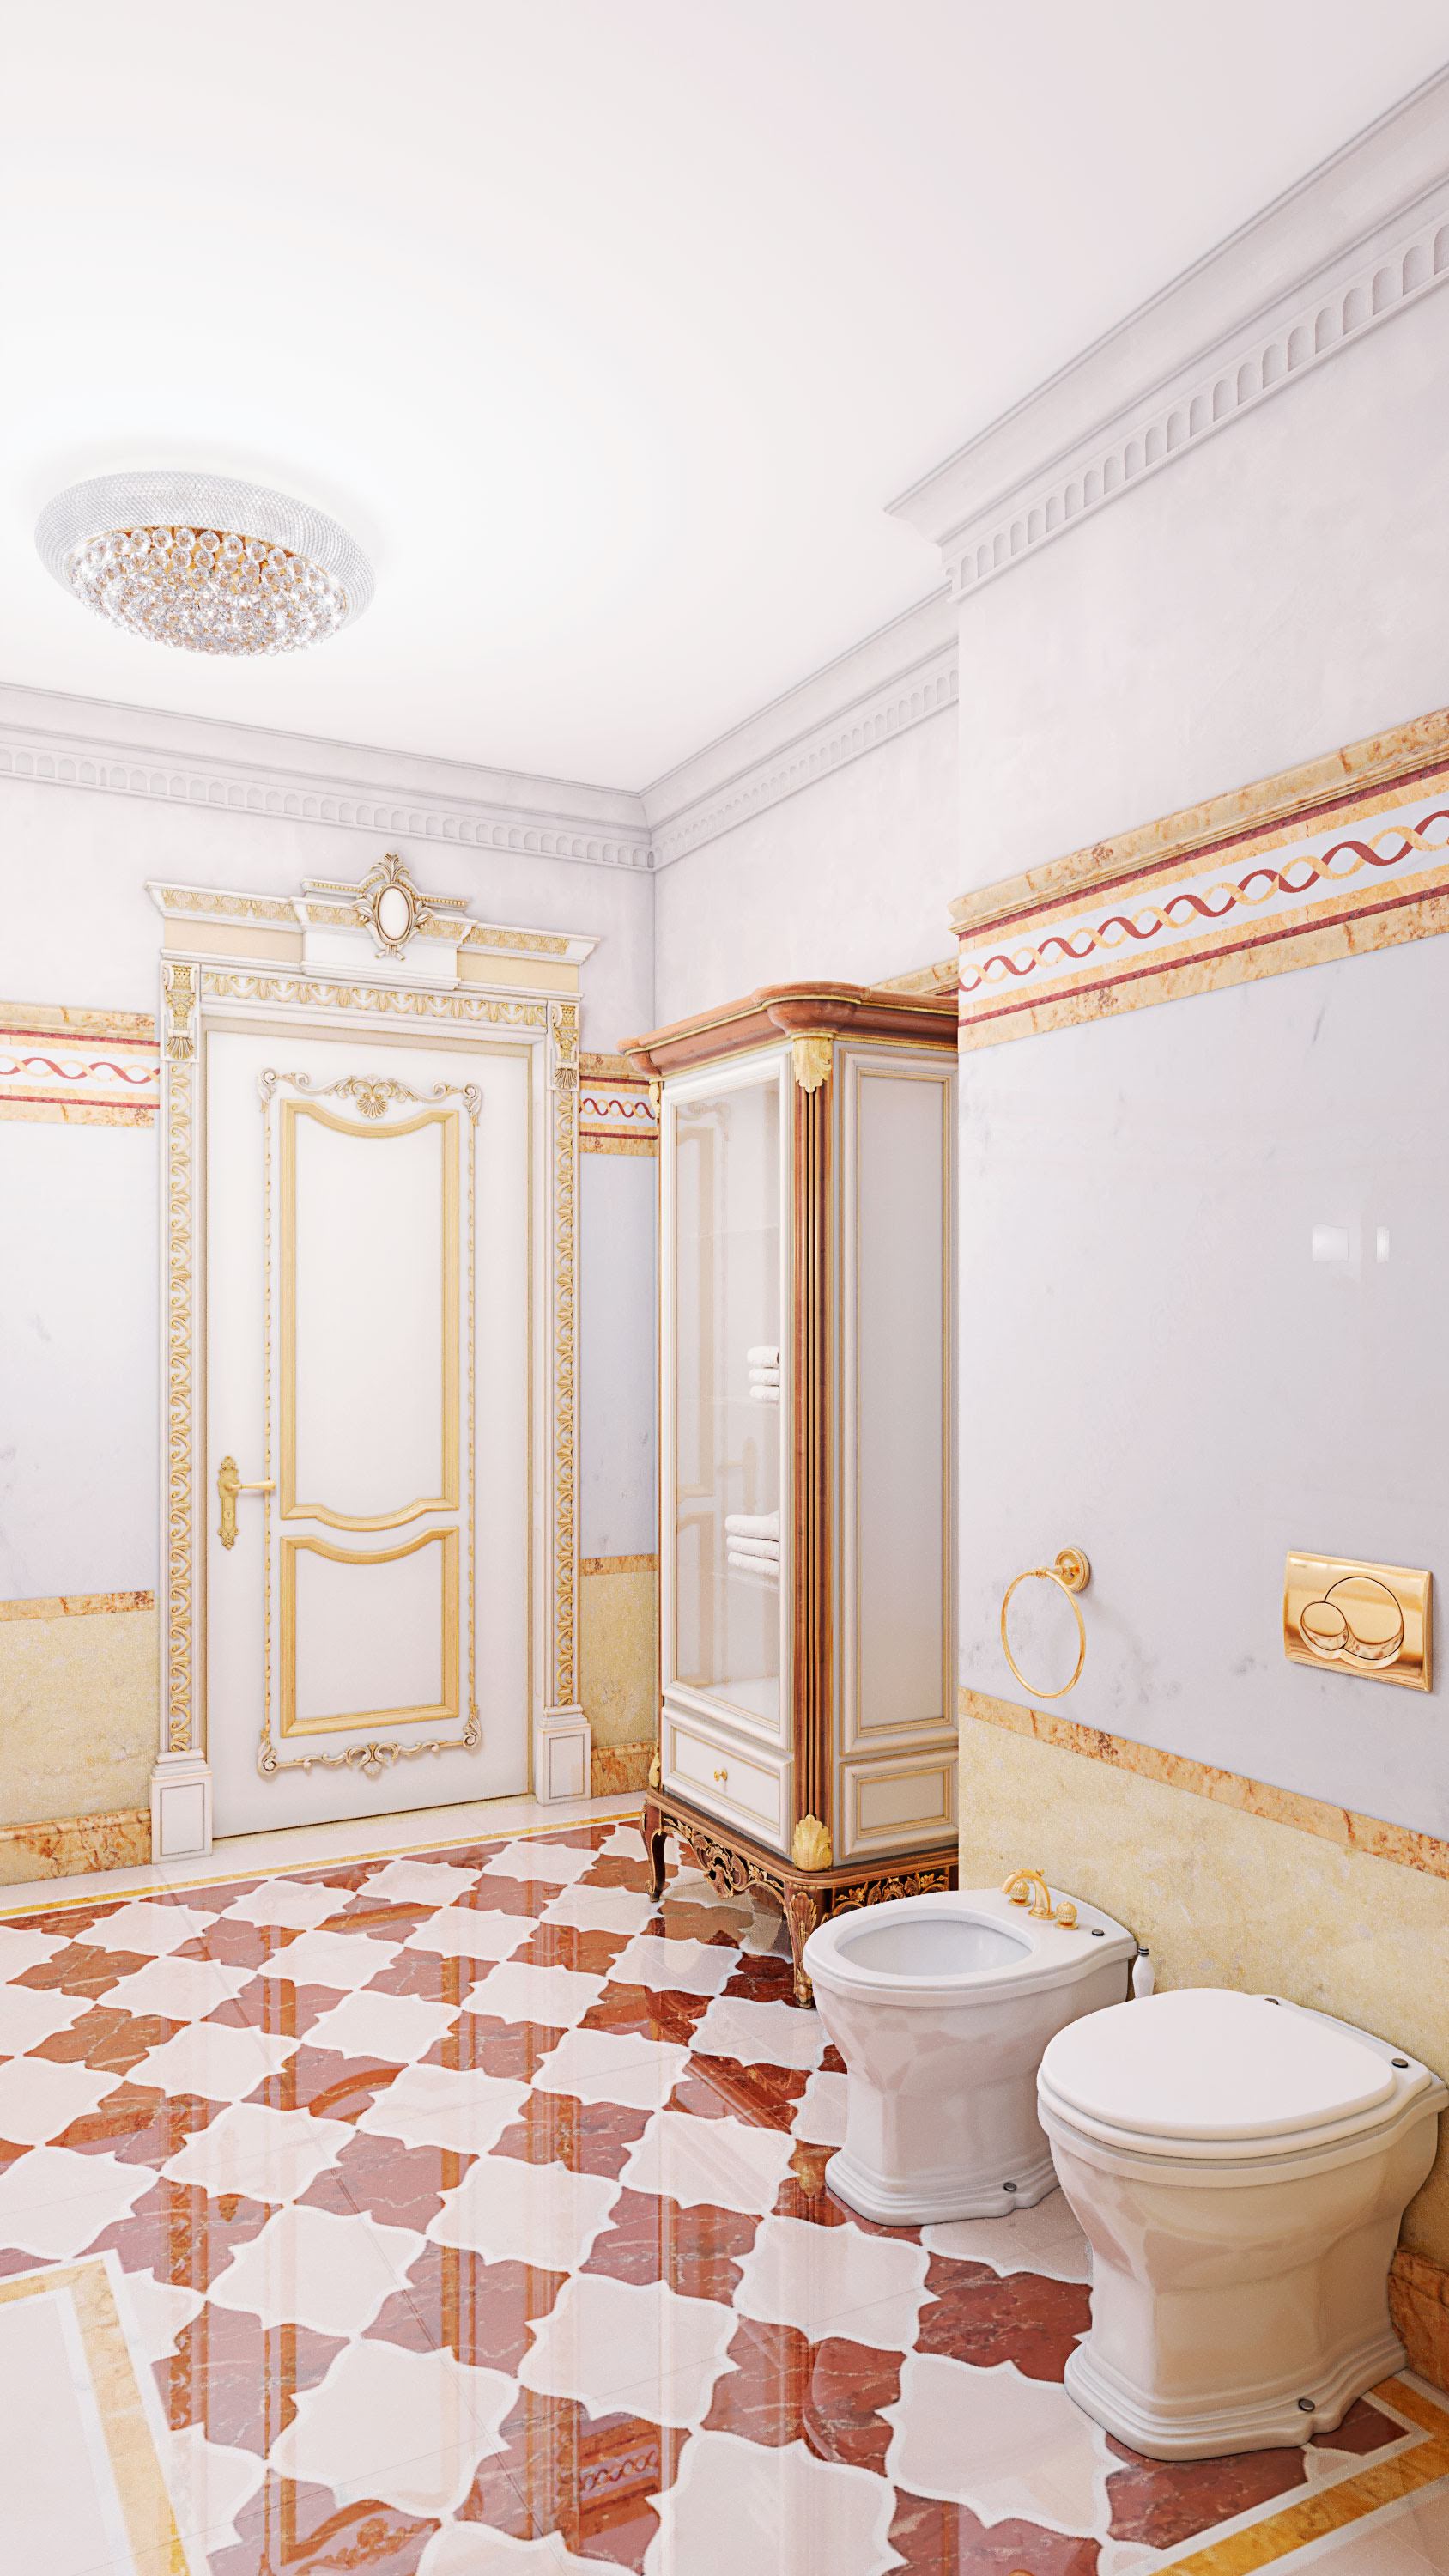 Design project of a bathroom in classic style